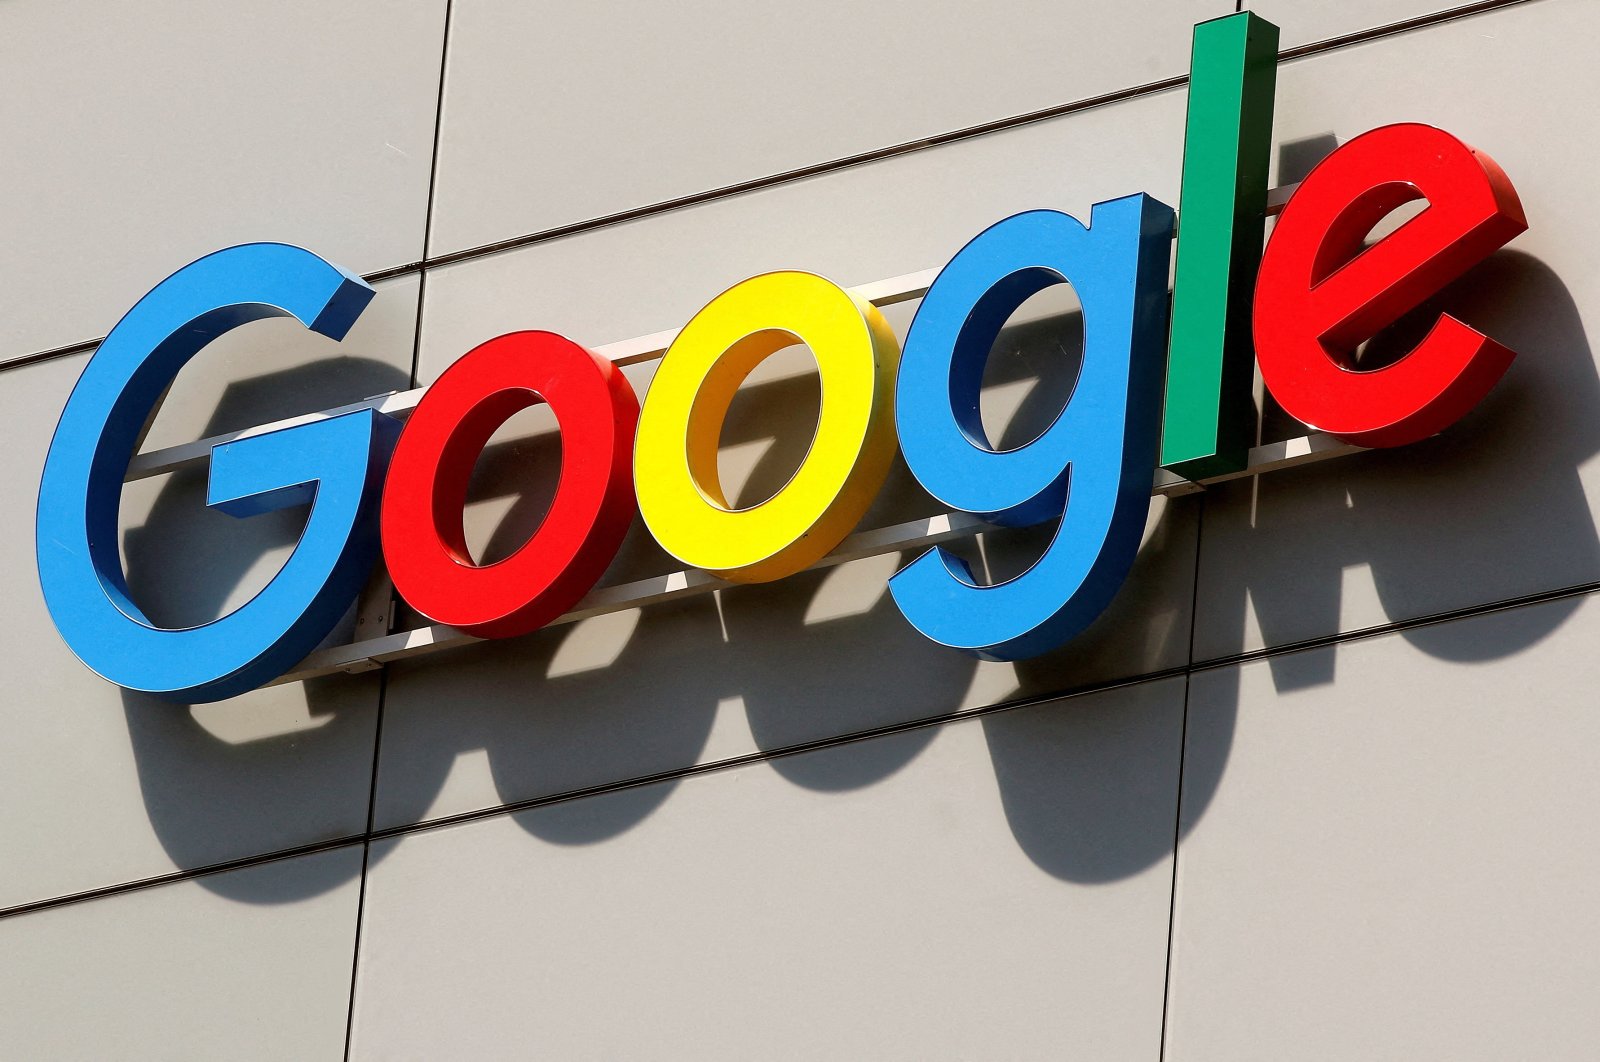 Google’s Gemini AI outperforms chat GPT-4 by five times: report